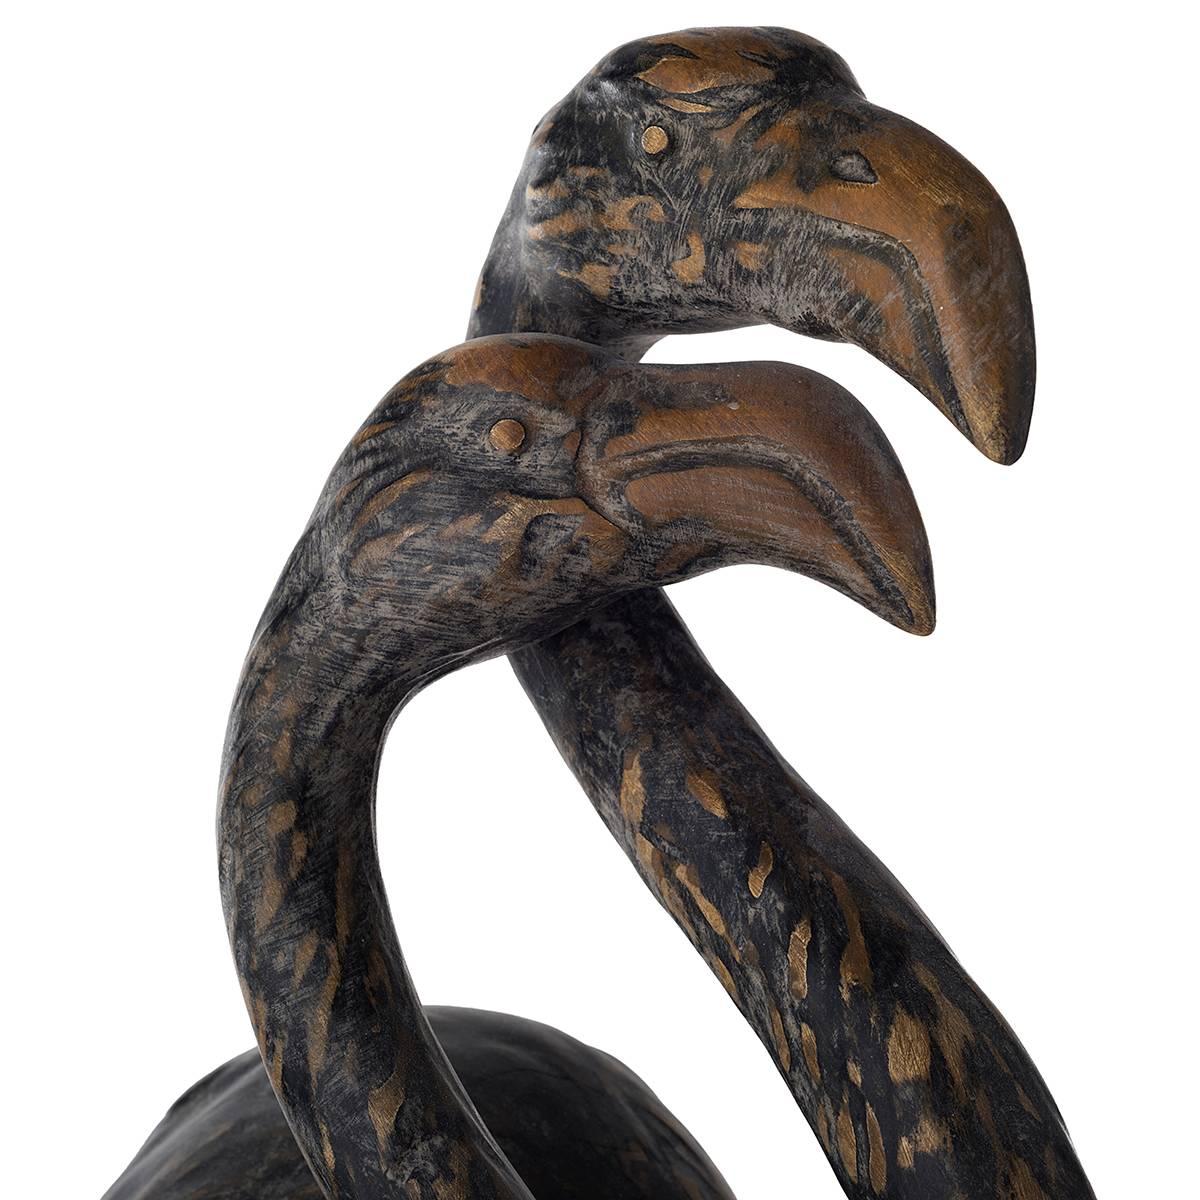 Ceramic reproduction of a flamingo couple. 
This elegant and romantic flamingo couple shows the fine detailing of this dark finished sculpture
Entirely made in ceramic and hand patinated with handsome features such as plumage and the peculiar pose,